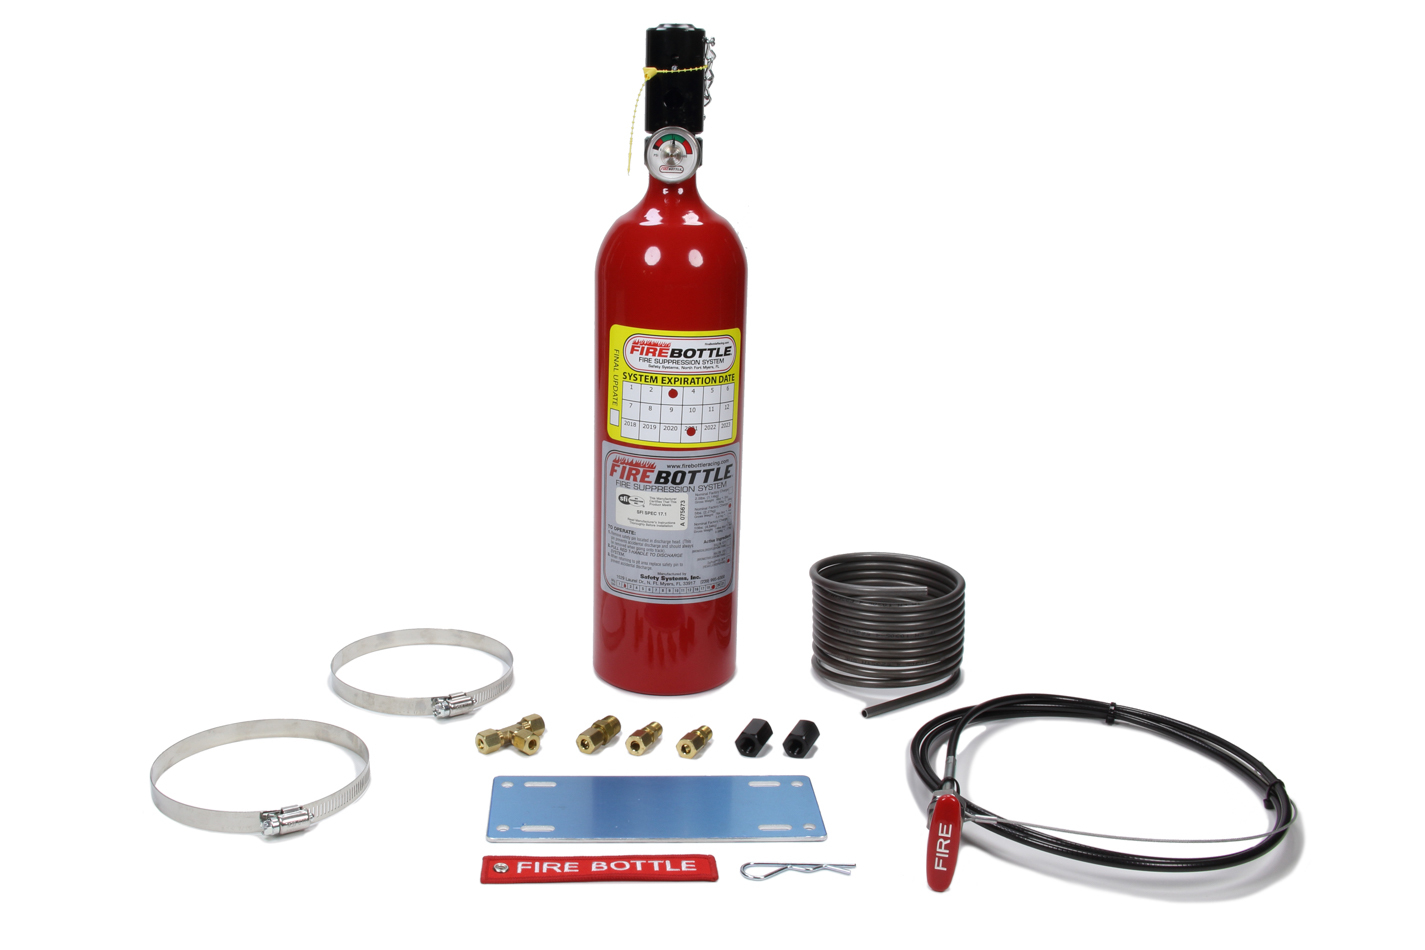 Safety Systems PRC-500 Fire Suppression System, RC, Manual, FE-36, SFI Rated, 5.0 lb Bottle, Fittings / Hose / Mount / Pull Cable, Kit